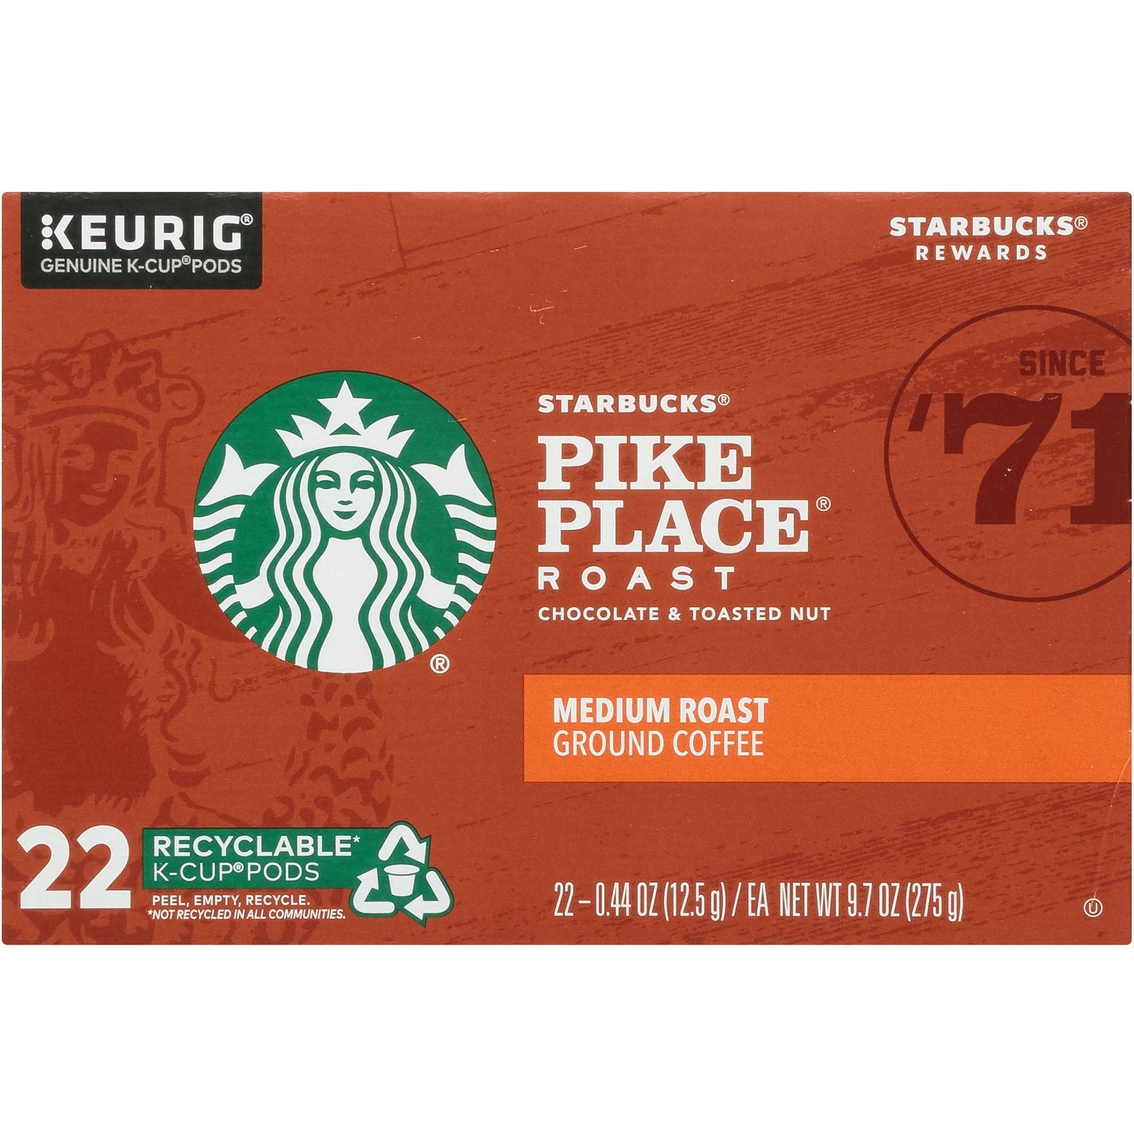 Starbucks K-Cup Pike Place Roast Coffee Pods 22 ct. - Image 6 of 6